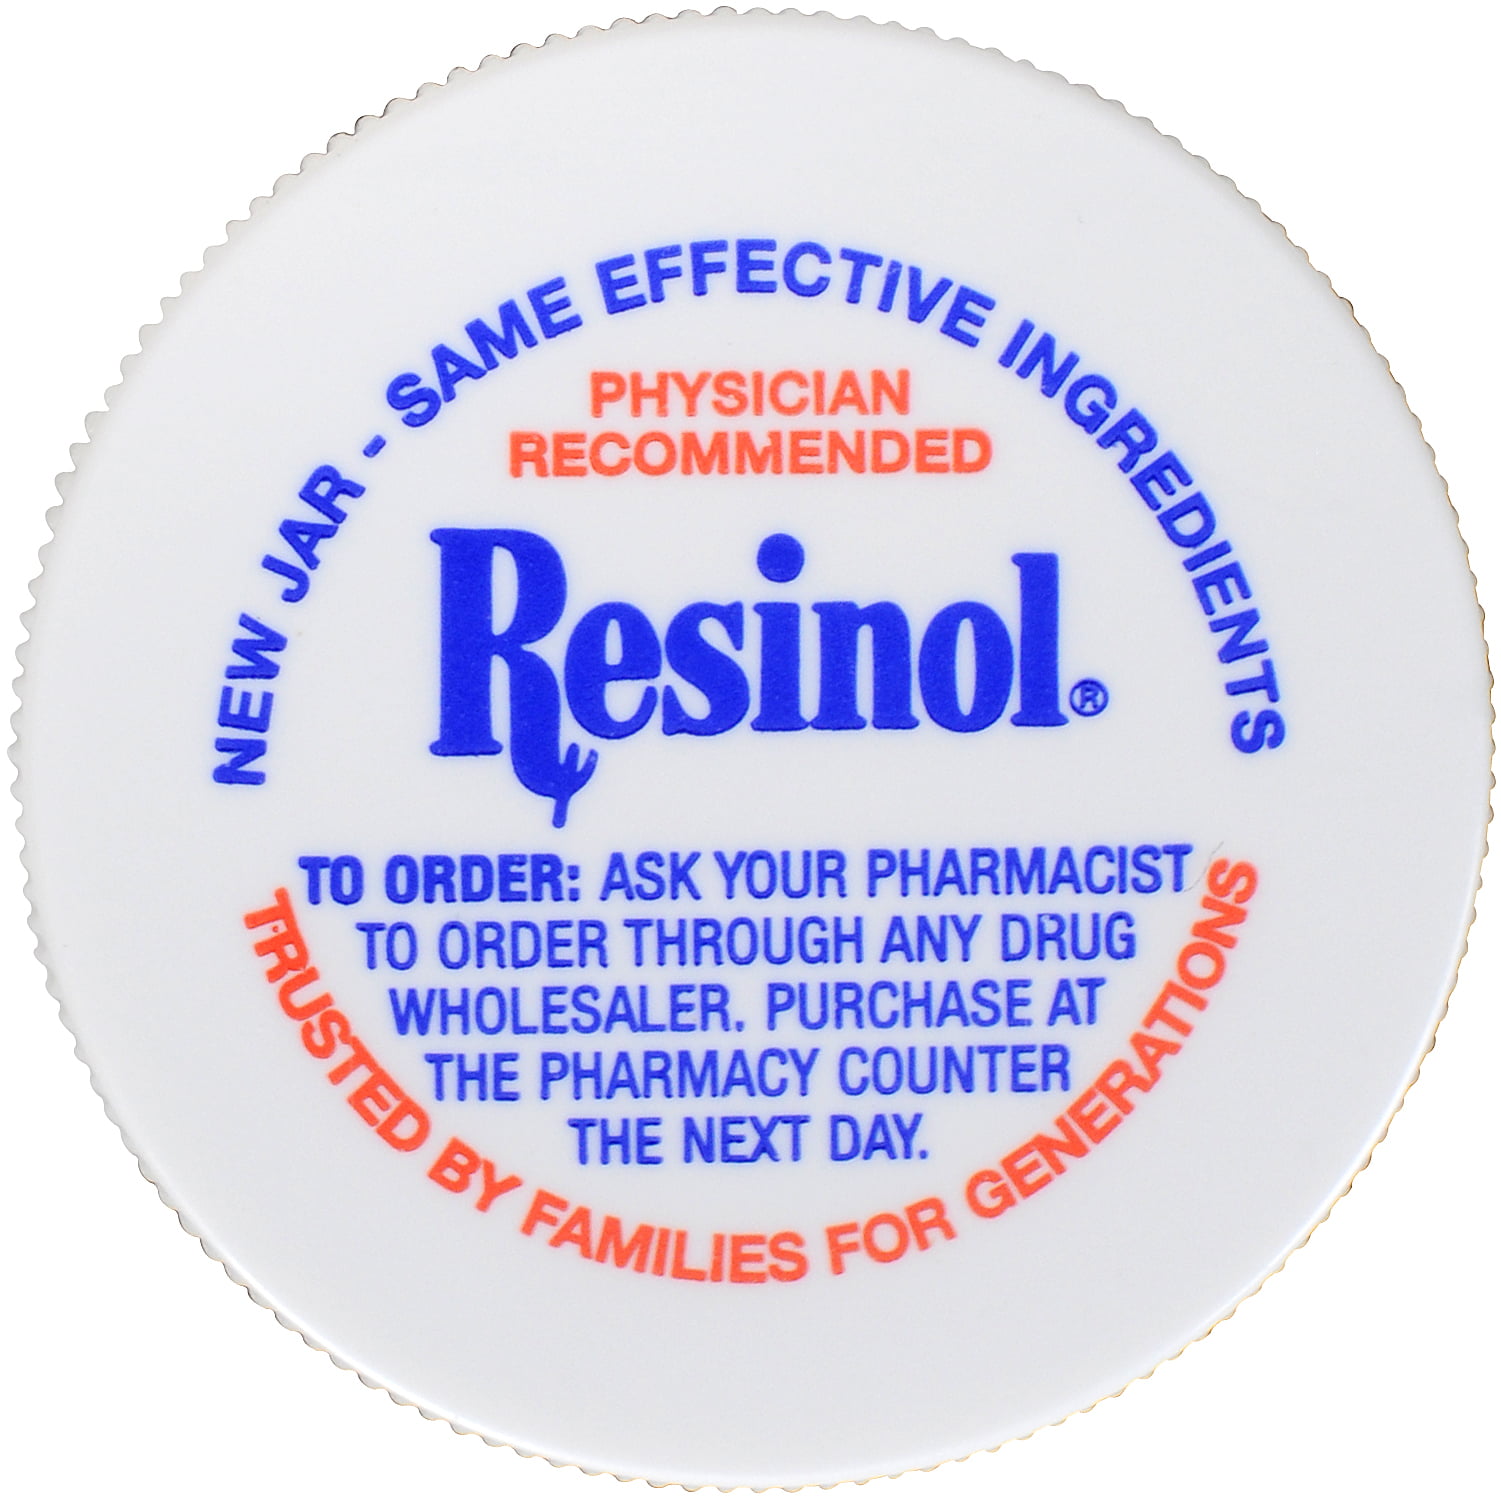 Resinol Medicated Ointment,Relief Of Minor Skin Irritations,2 PACK, 1.25 oz  each